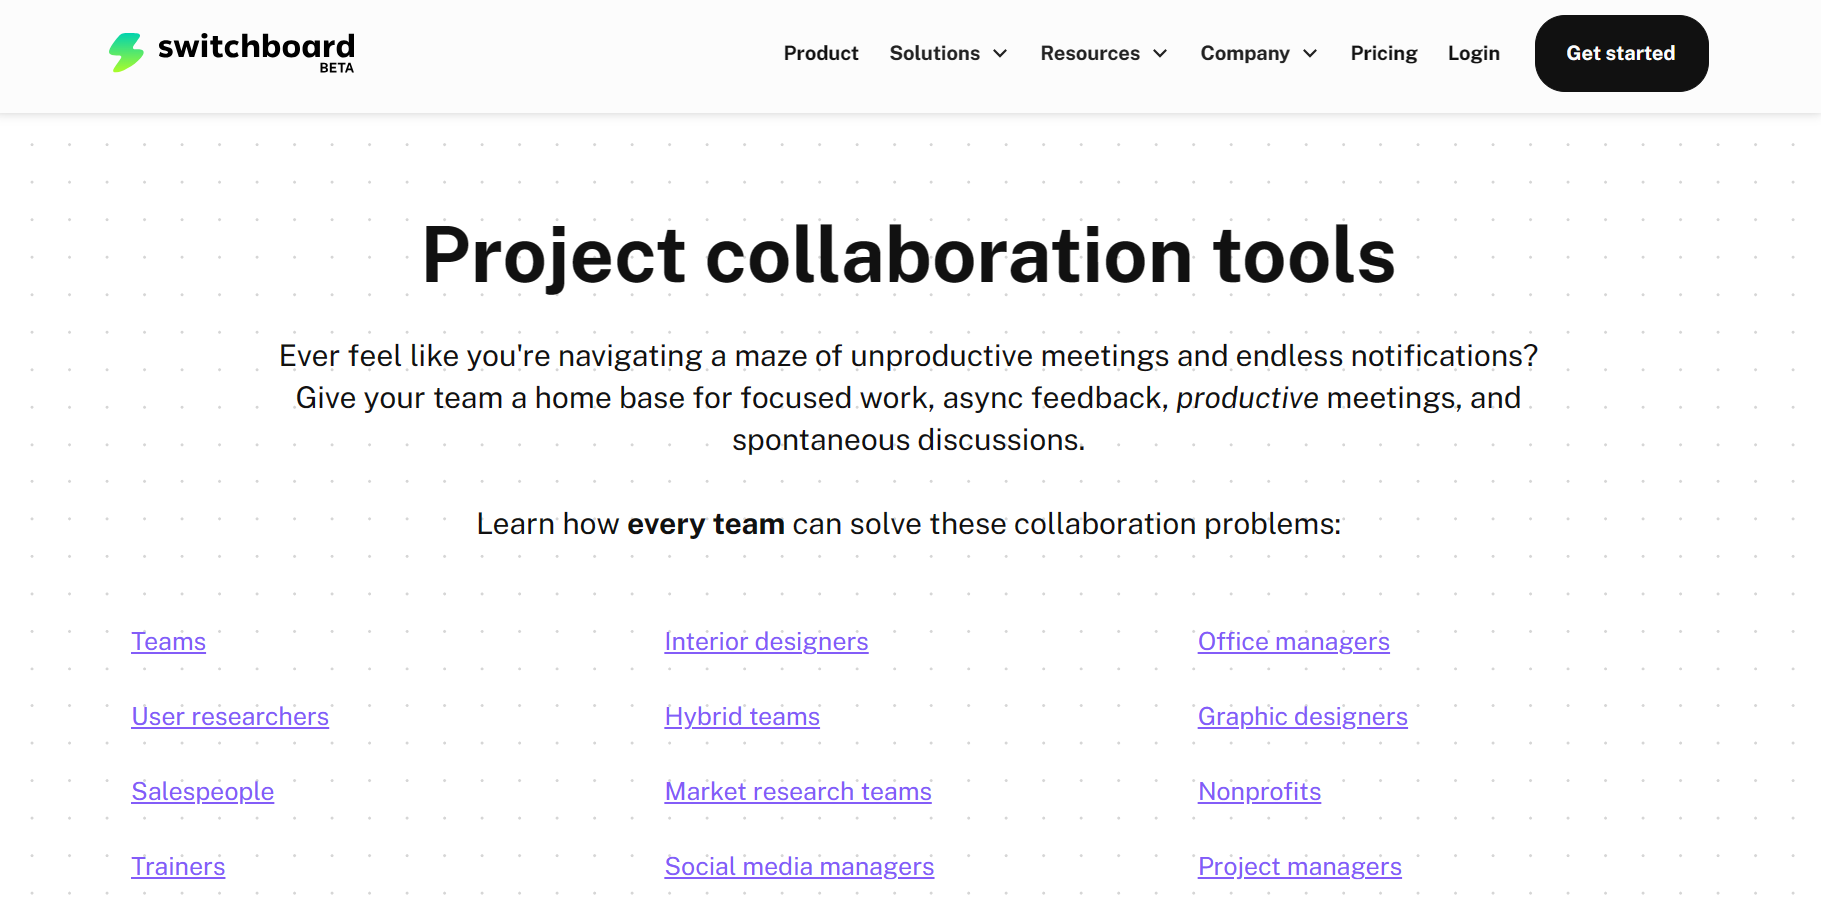 A screenshot of Switchboard’s project collaboration tools hub page